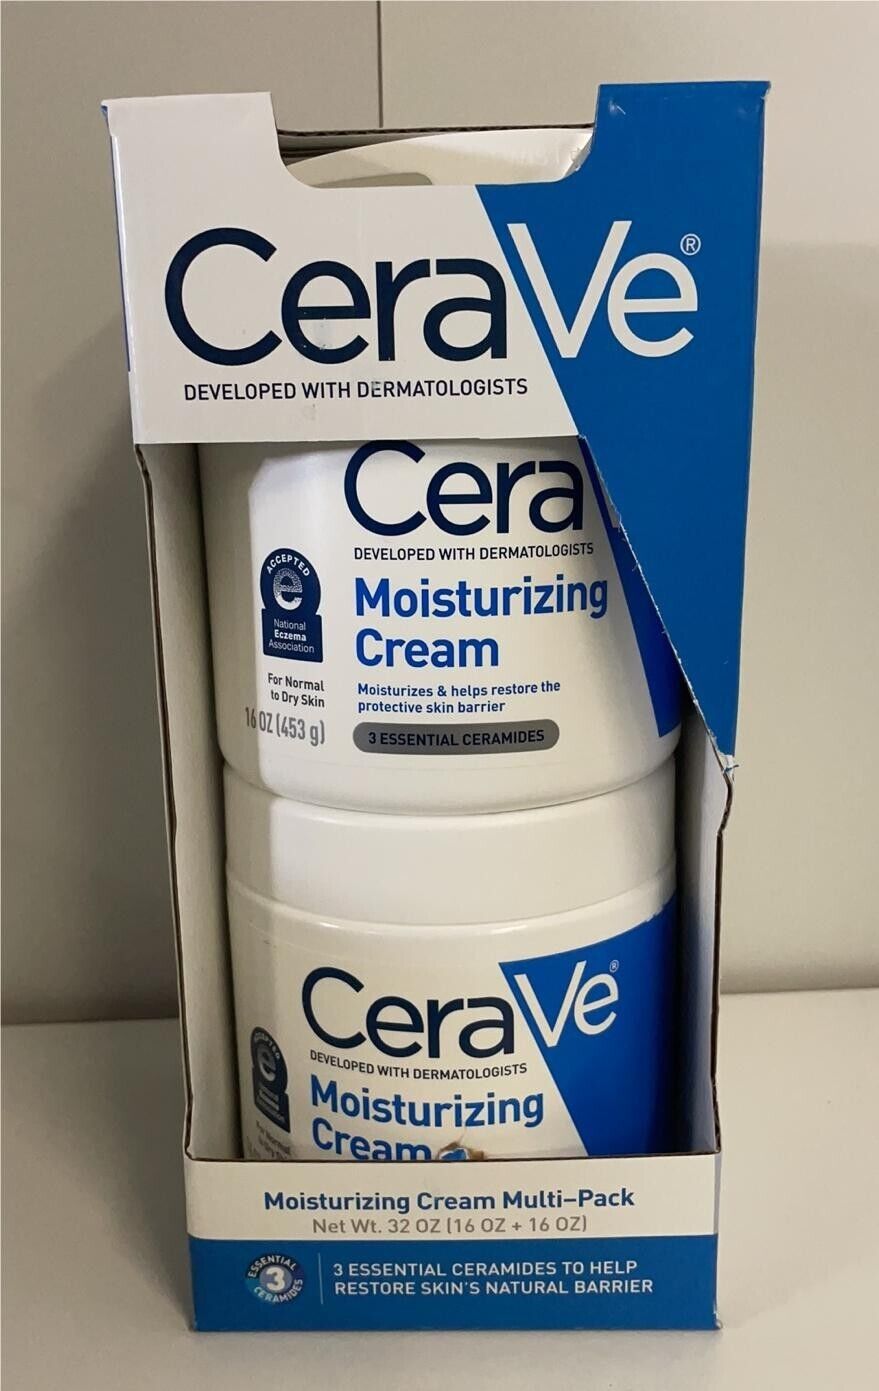 CeraVe Moisturizing Cream with Pump for Normal to Dry Skin - 16 oz+16 oz